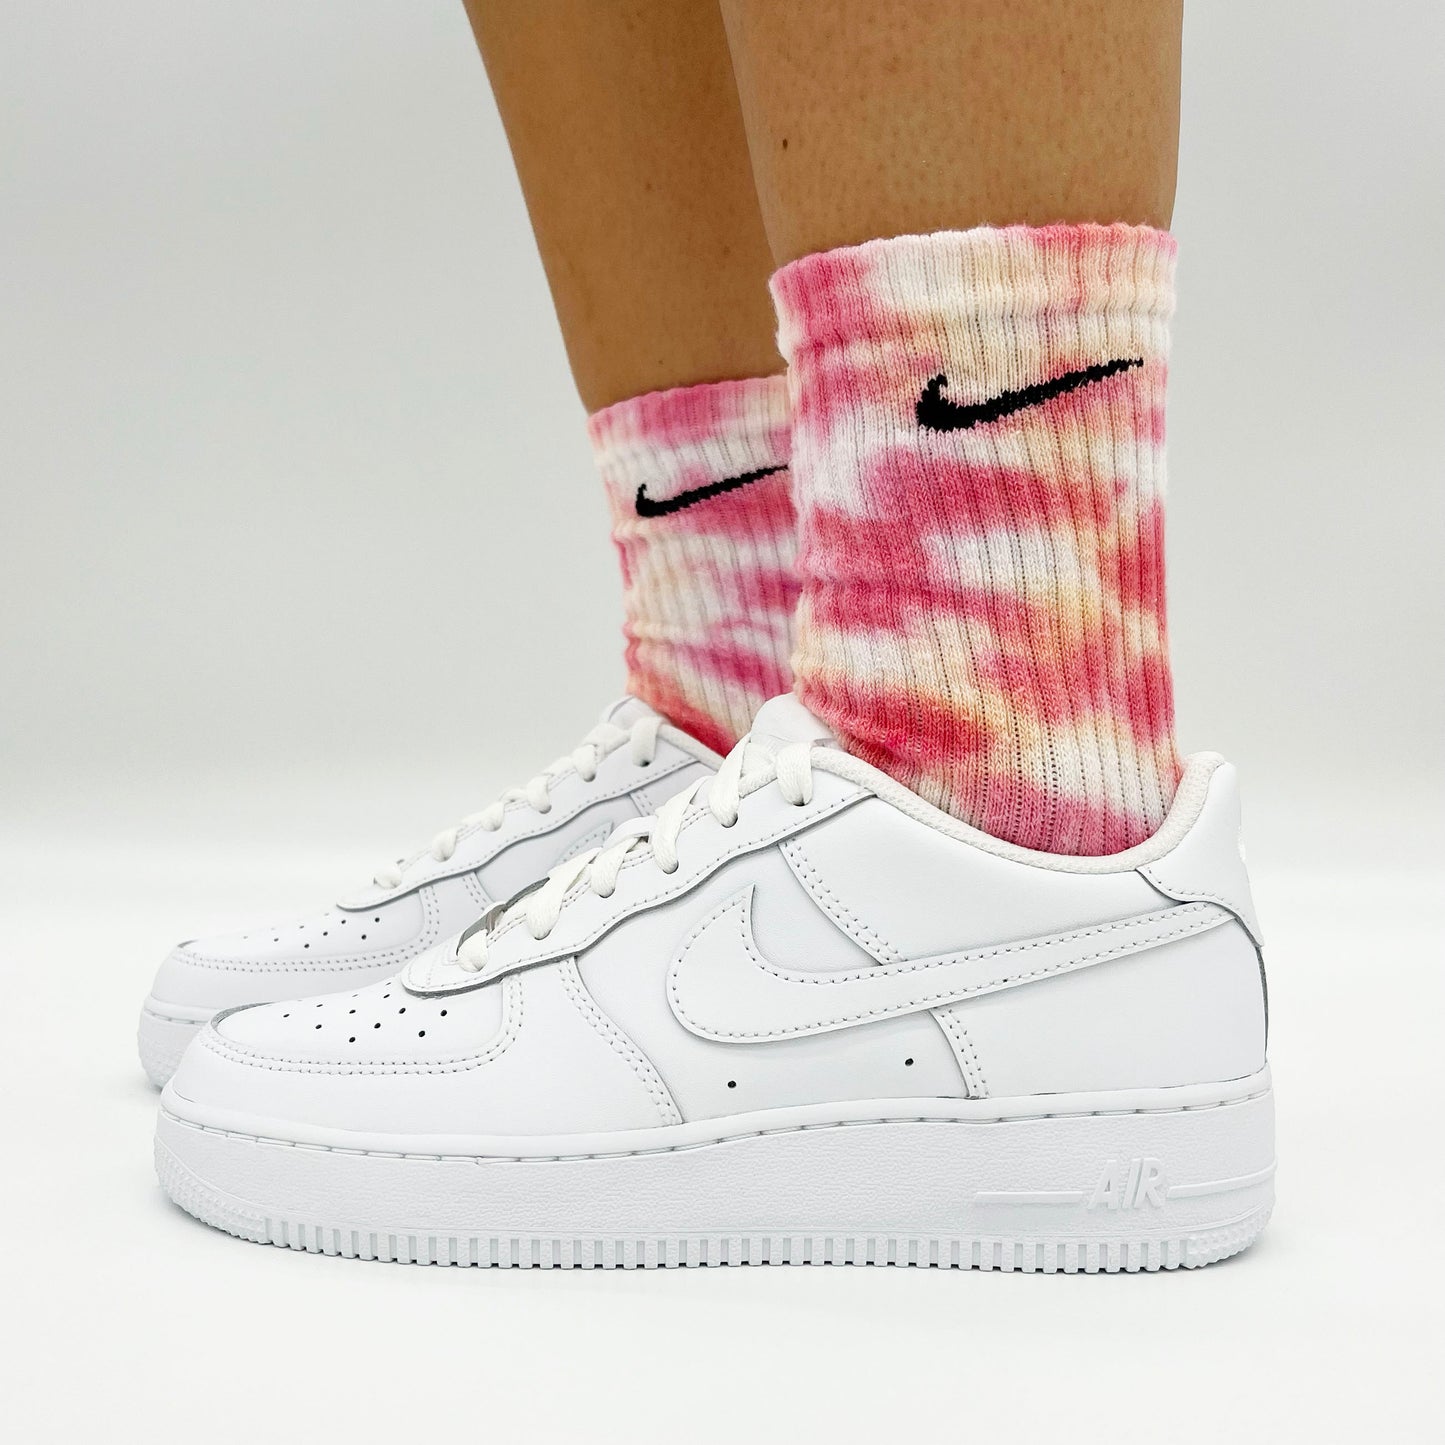 Chaussettes Nike Tie and Dye Corail